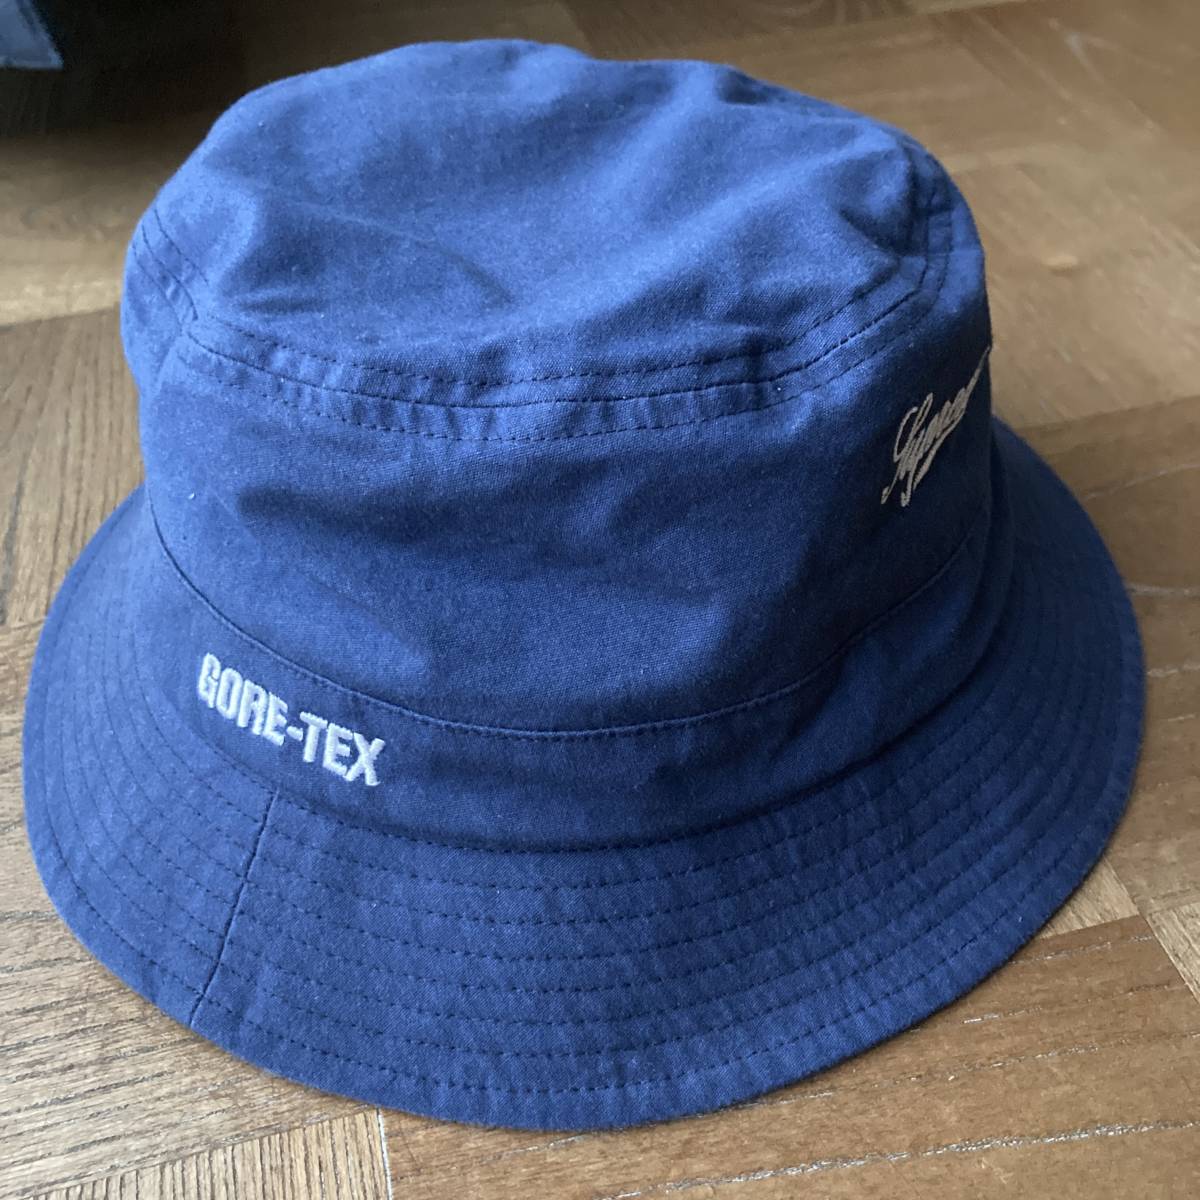 Supreme 2020 FW GORE-TEX Crusher hats s/m｜PayPayフリマ